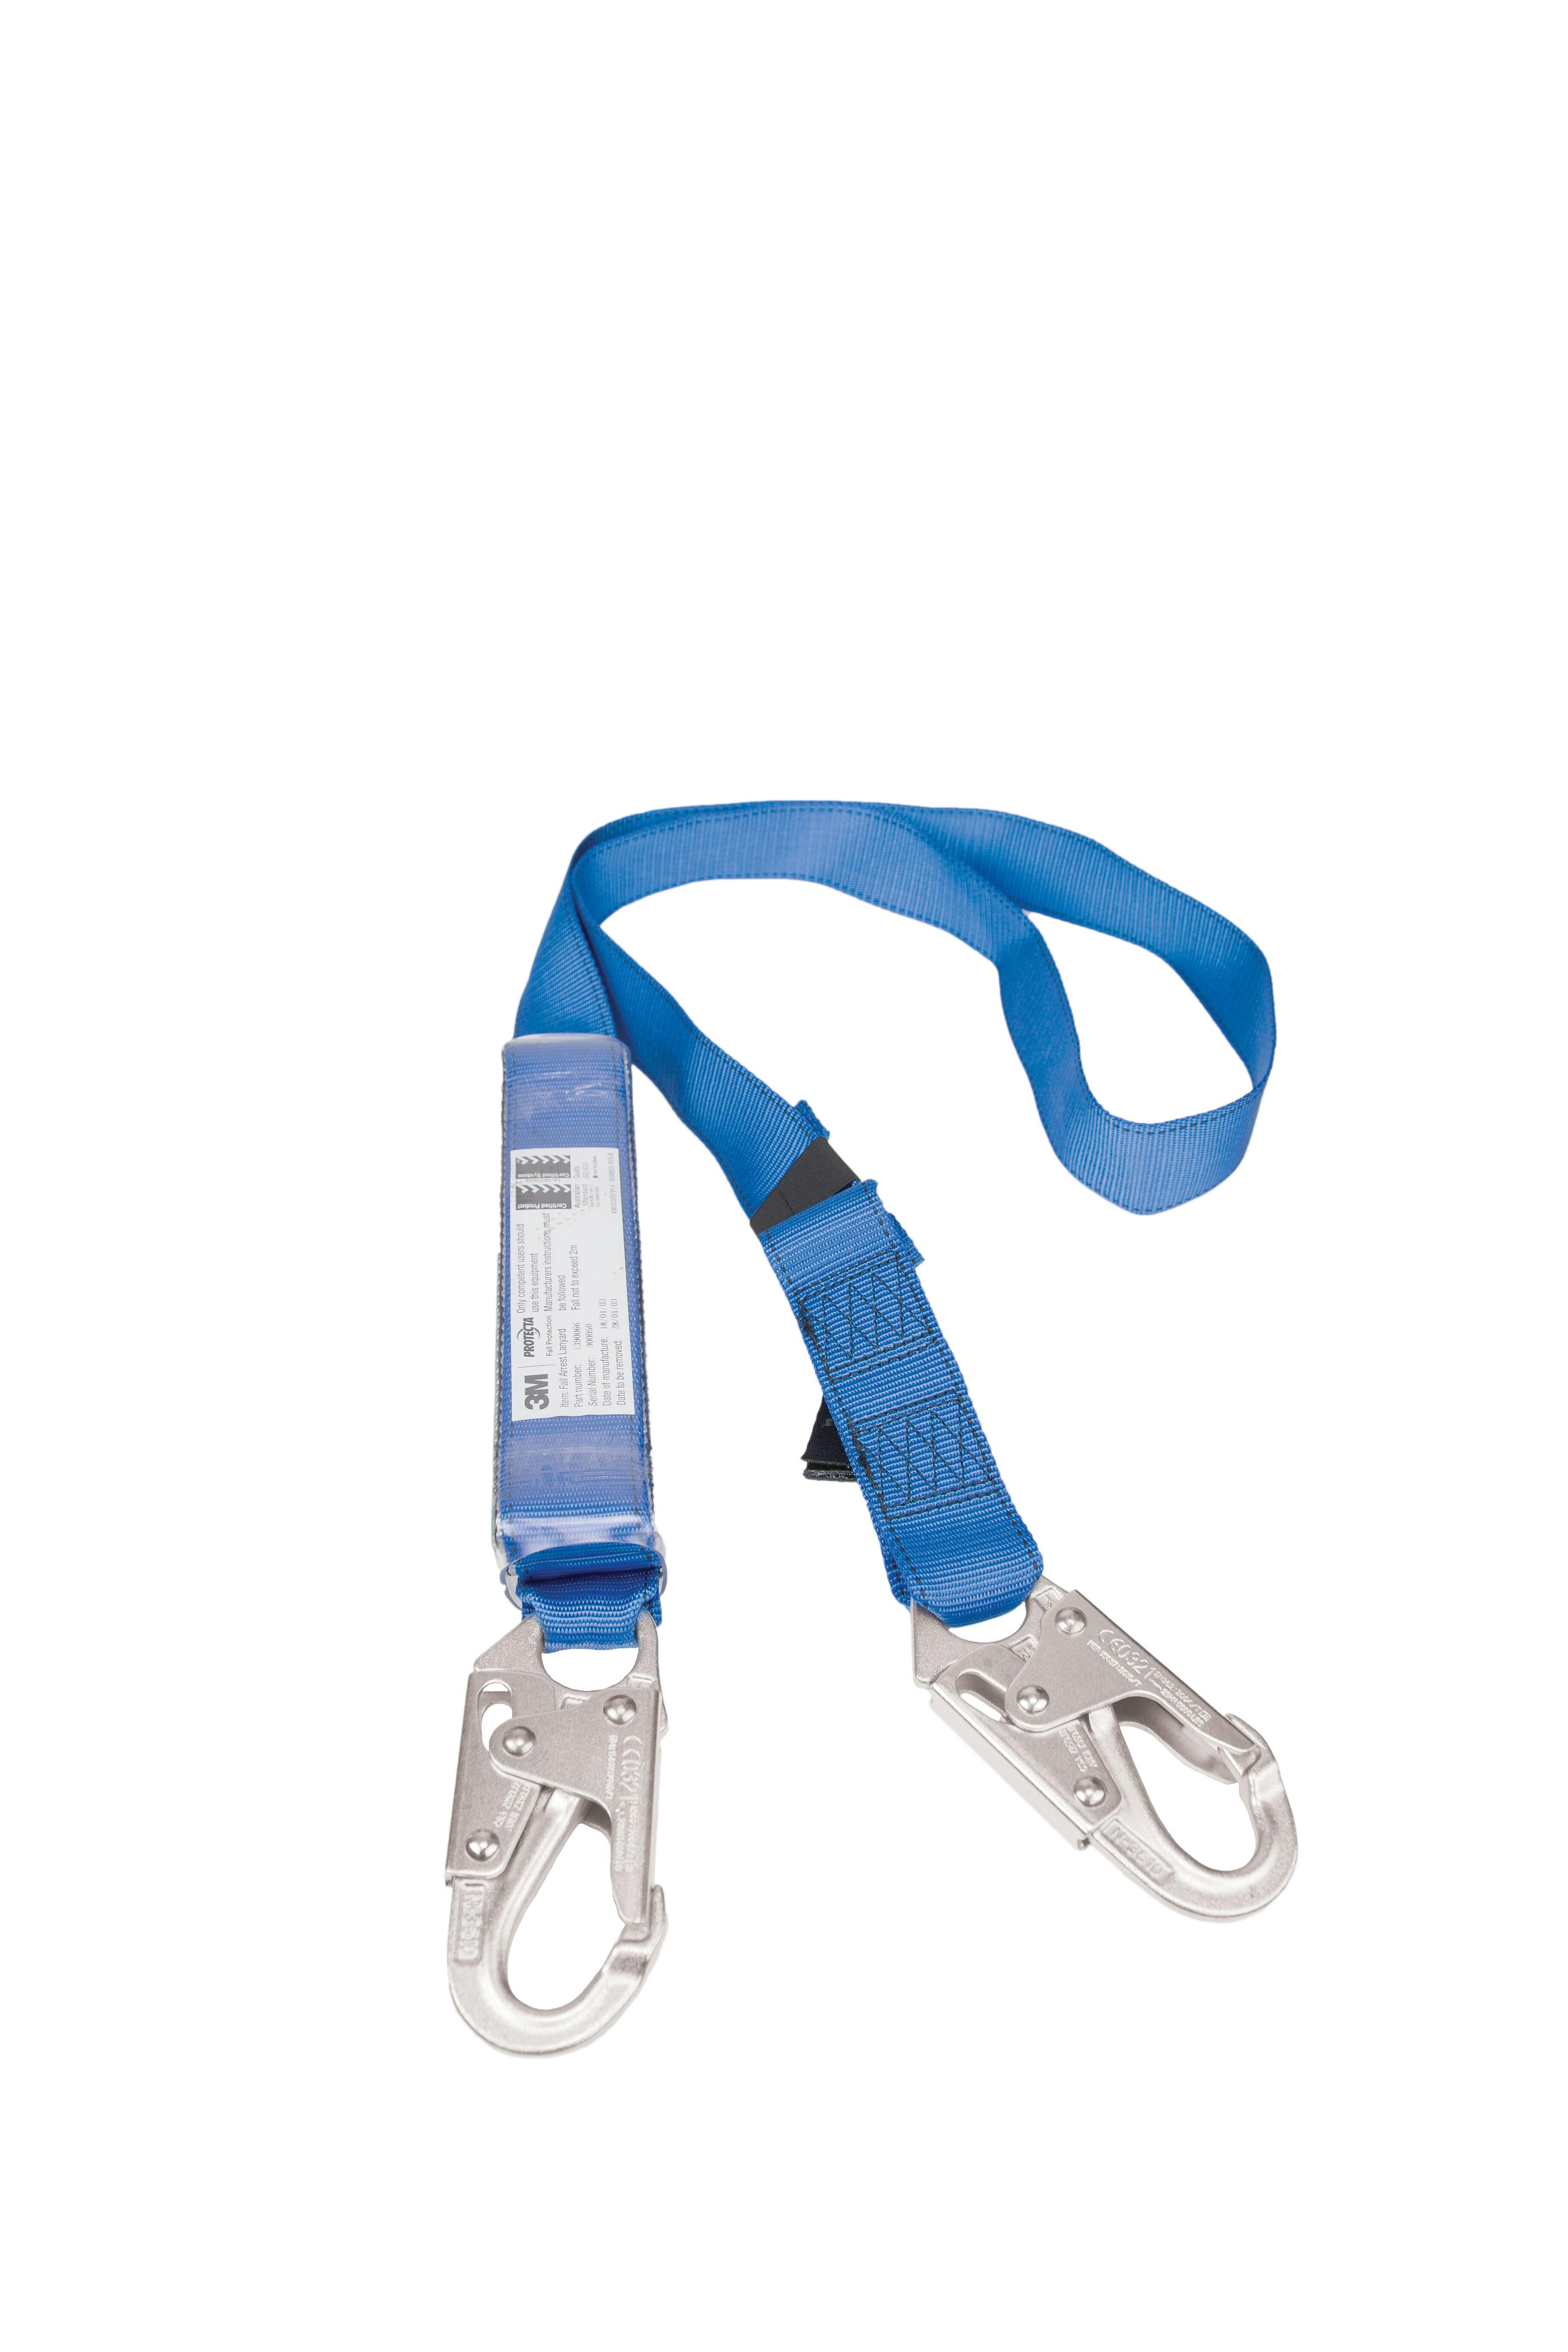 3M™ PROTECTA® FIRST Shock Absorbing Lanyard - Single Tail 1390066A, Blue and Yellow, 2.0 m, 1 EA/Case